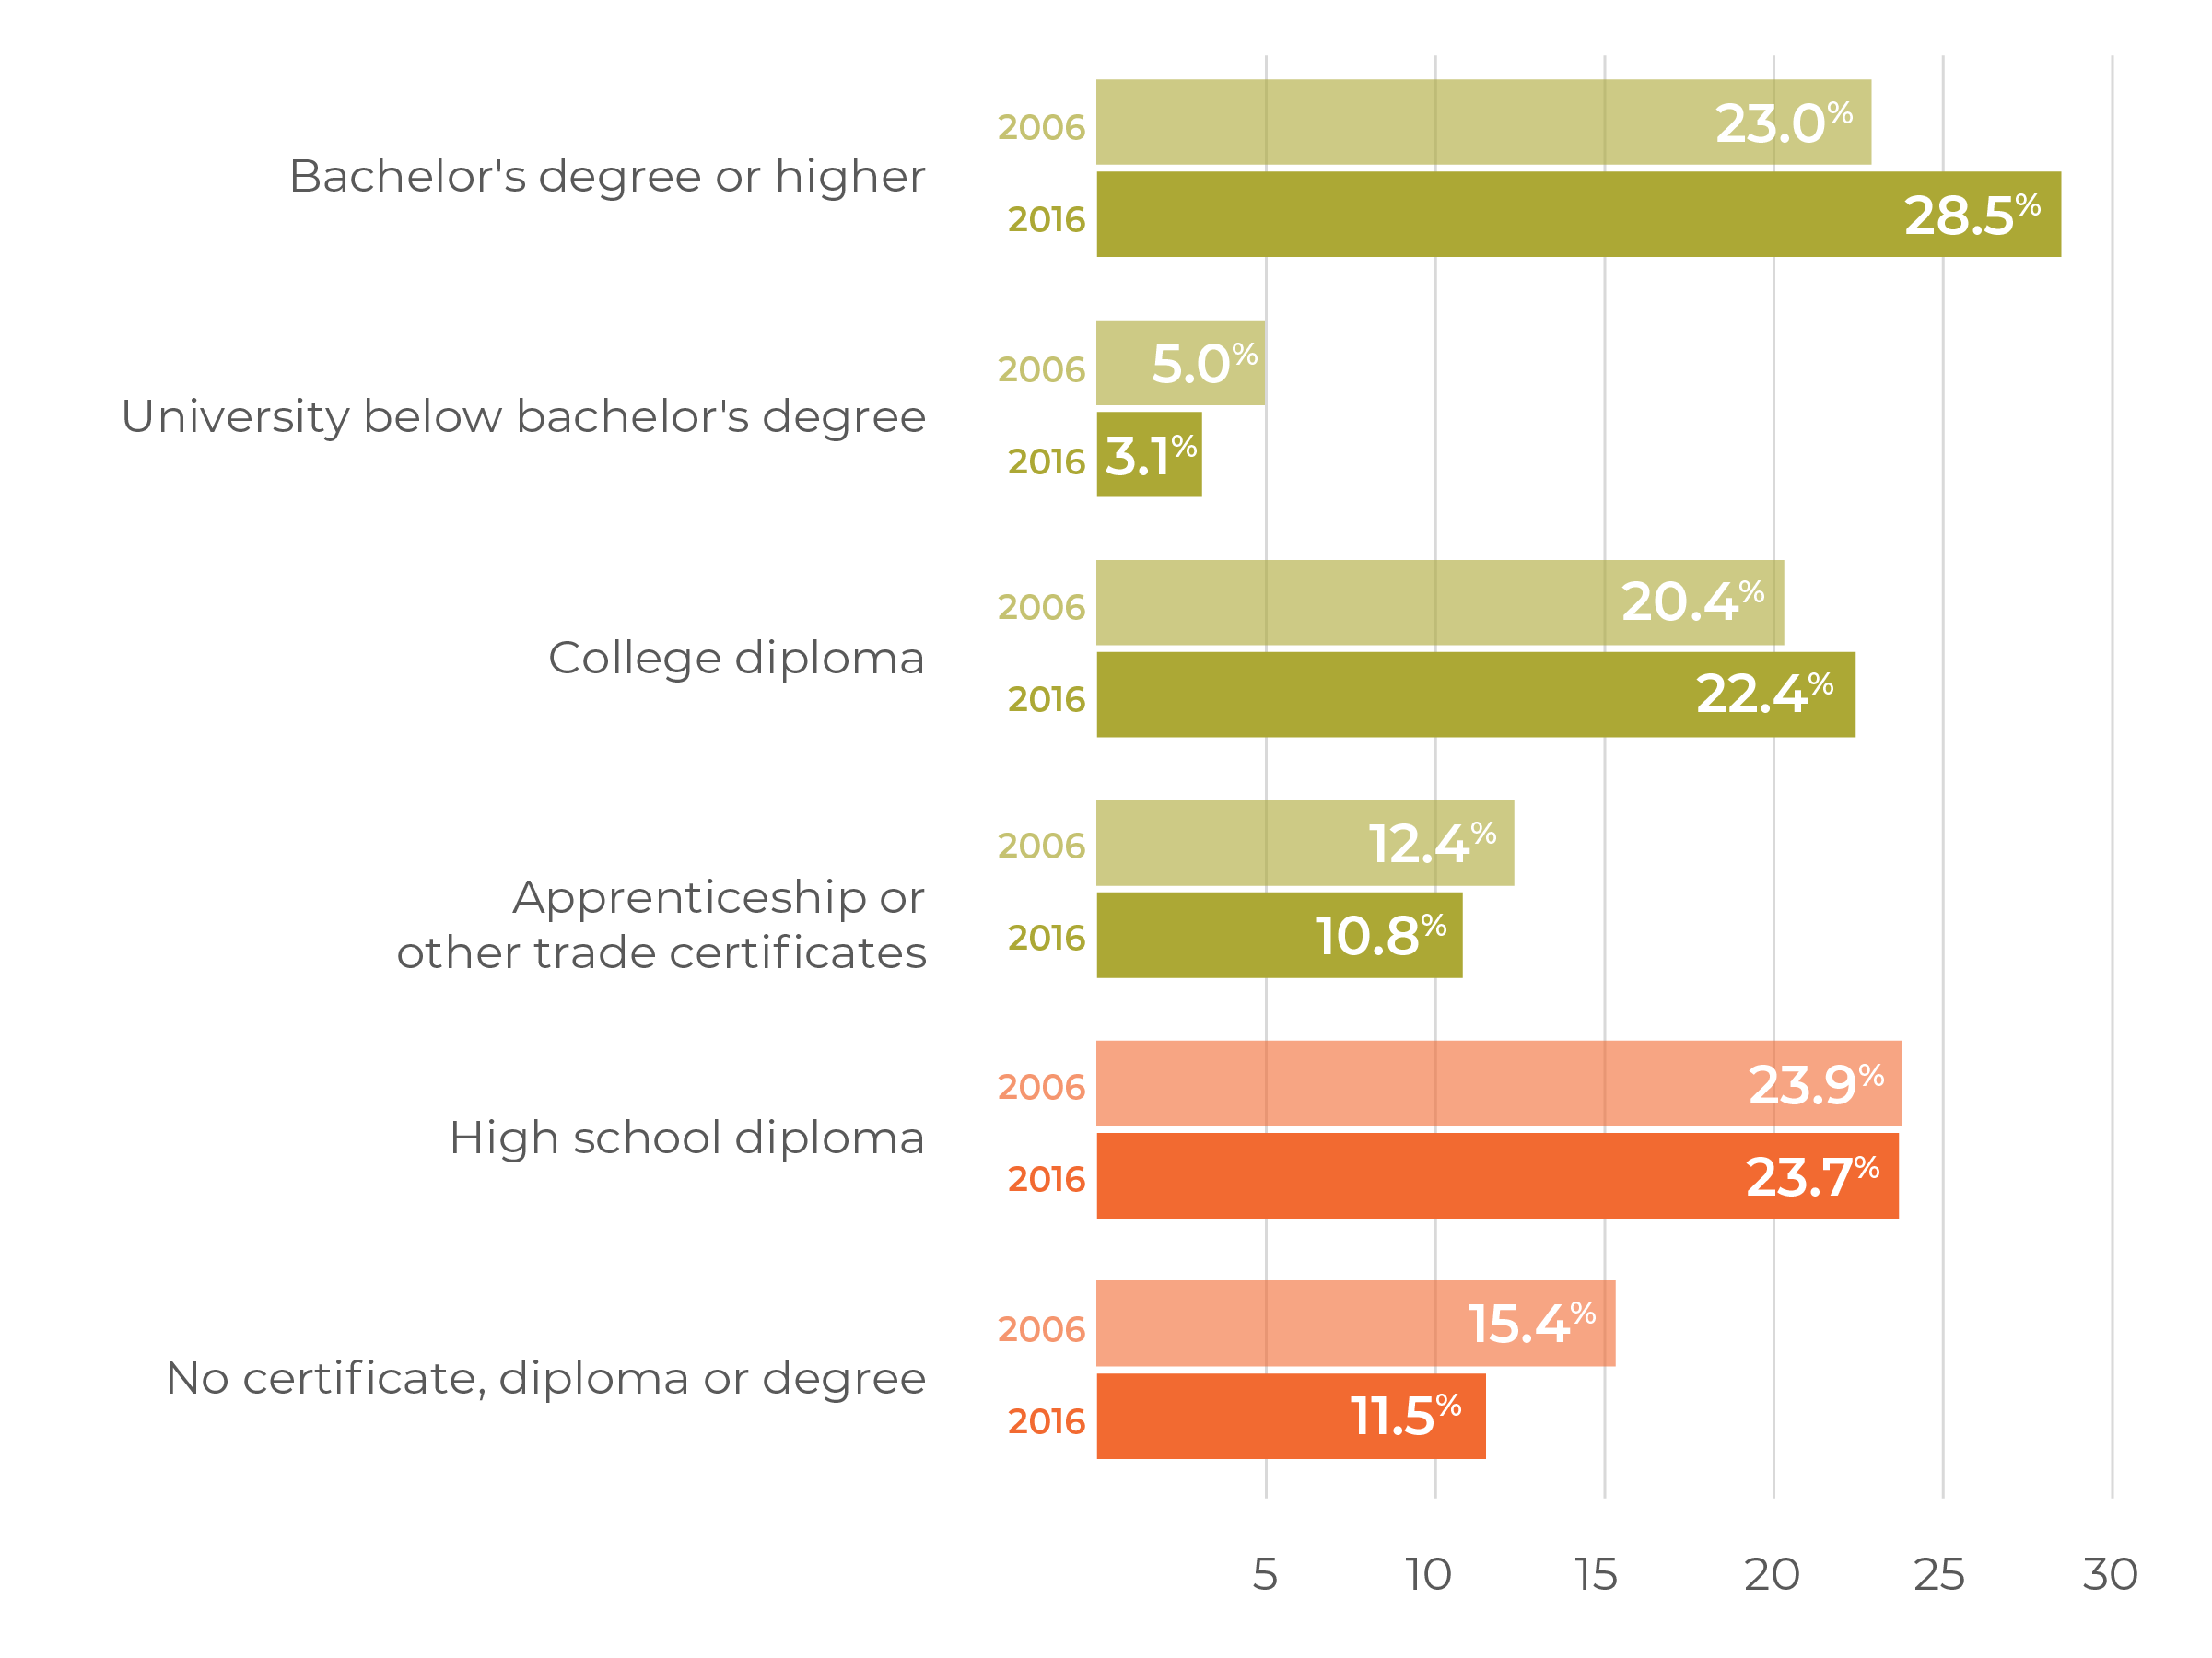 Figure 3. Educational Attainment Rates in Canada (Both Sexes, Aged 25 to 64), 2006 and 2016